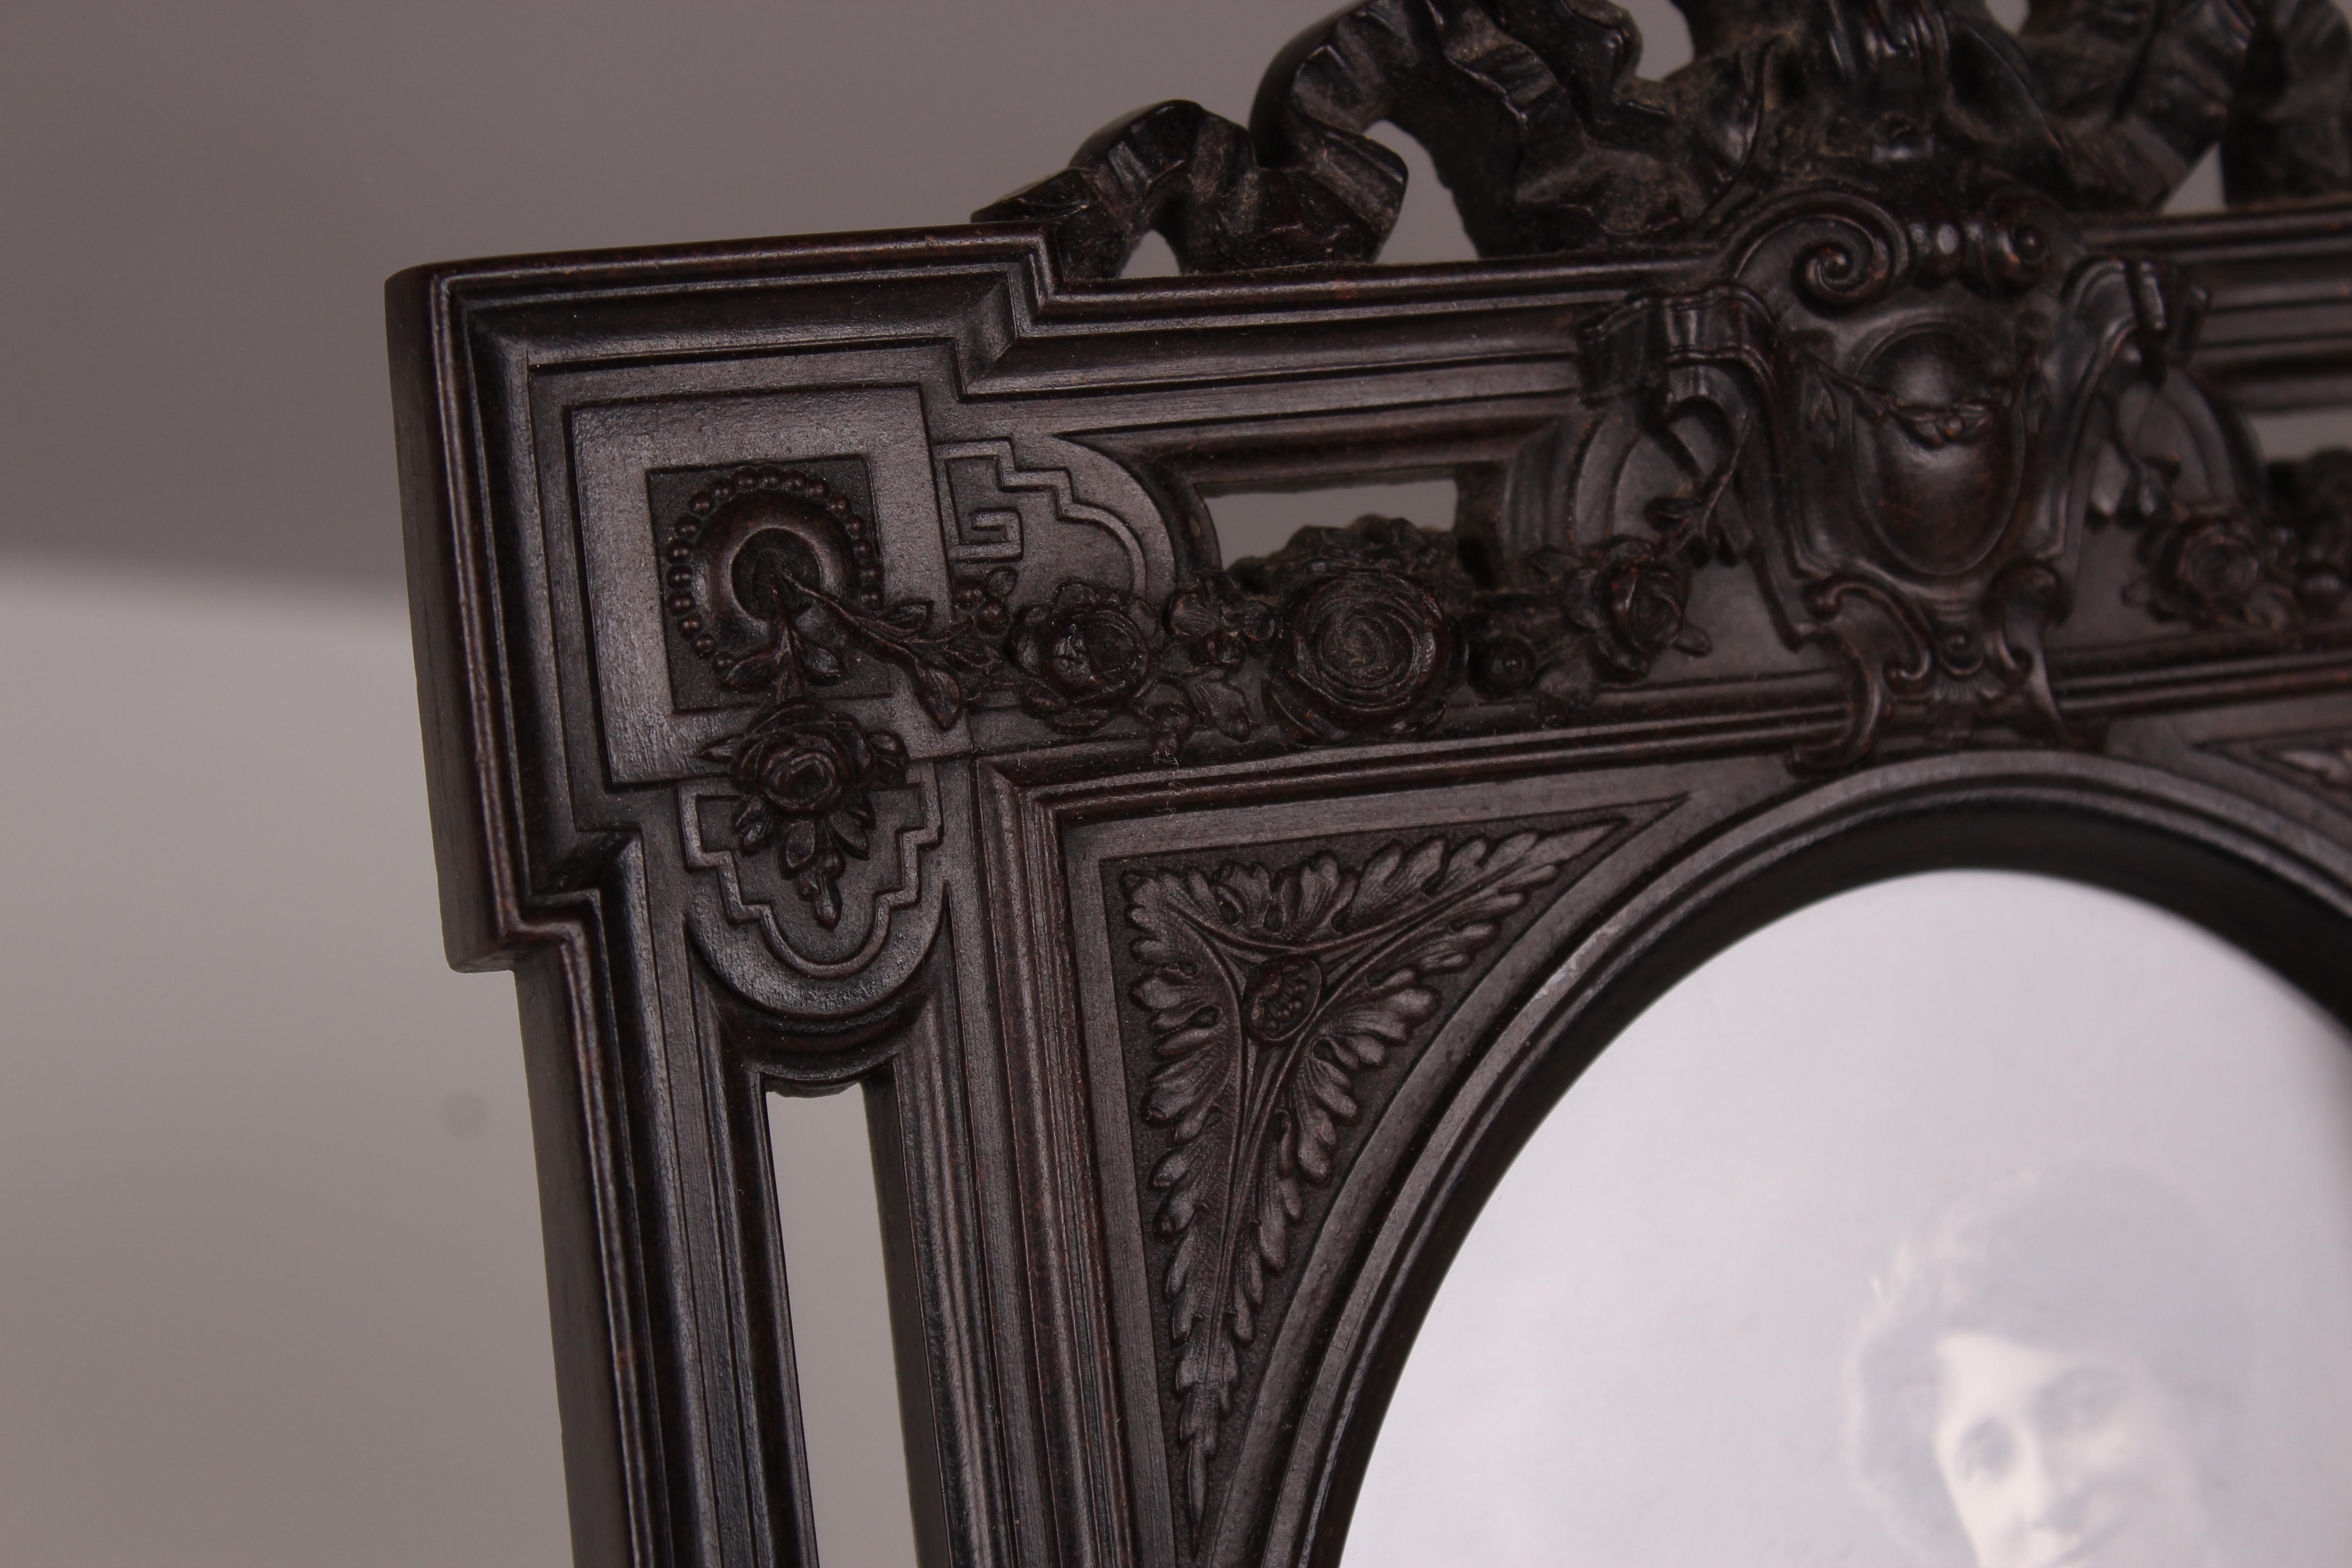 Beautiful victorian picture frame from France circa 1880.
Made of the particular material Gutta-Percha.

